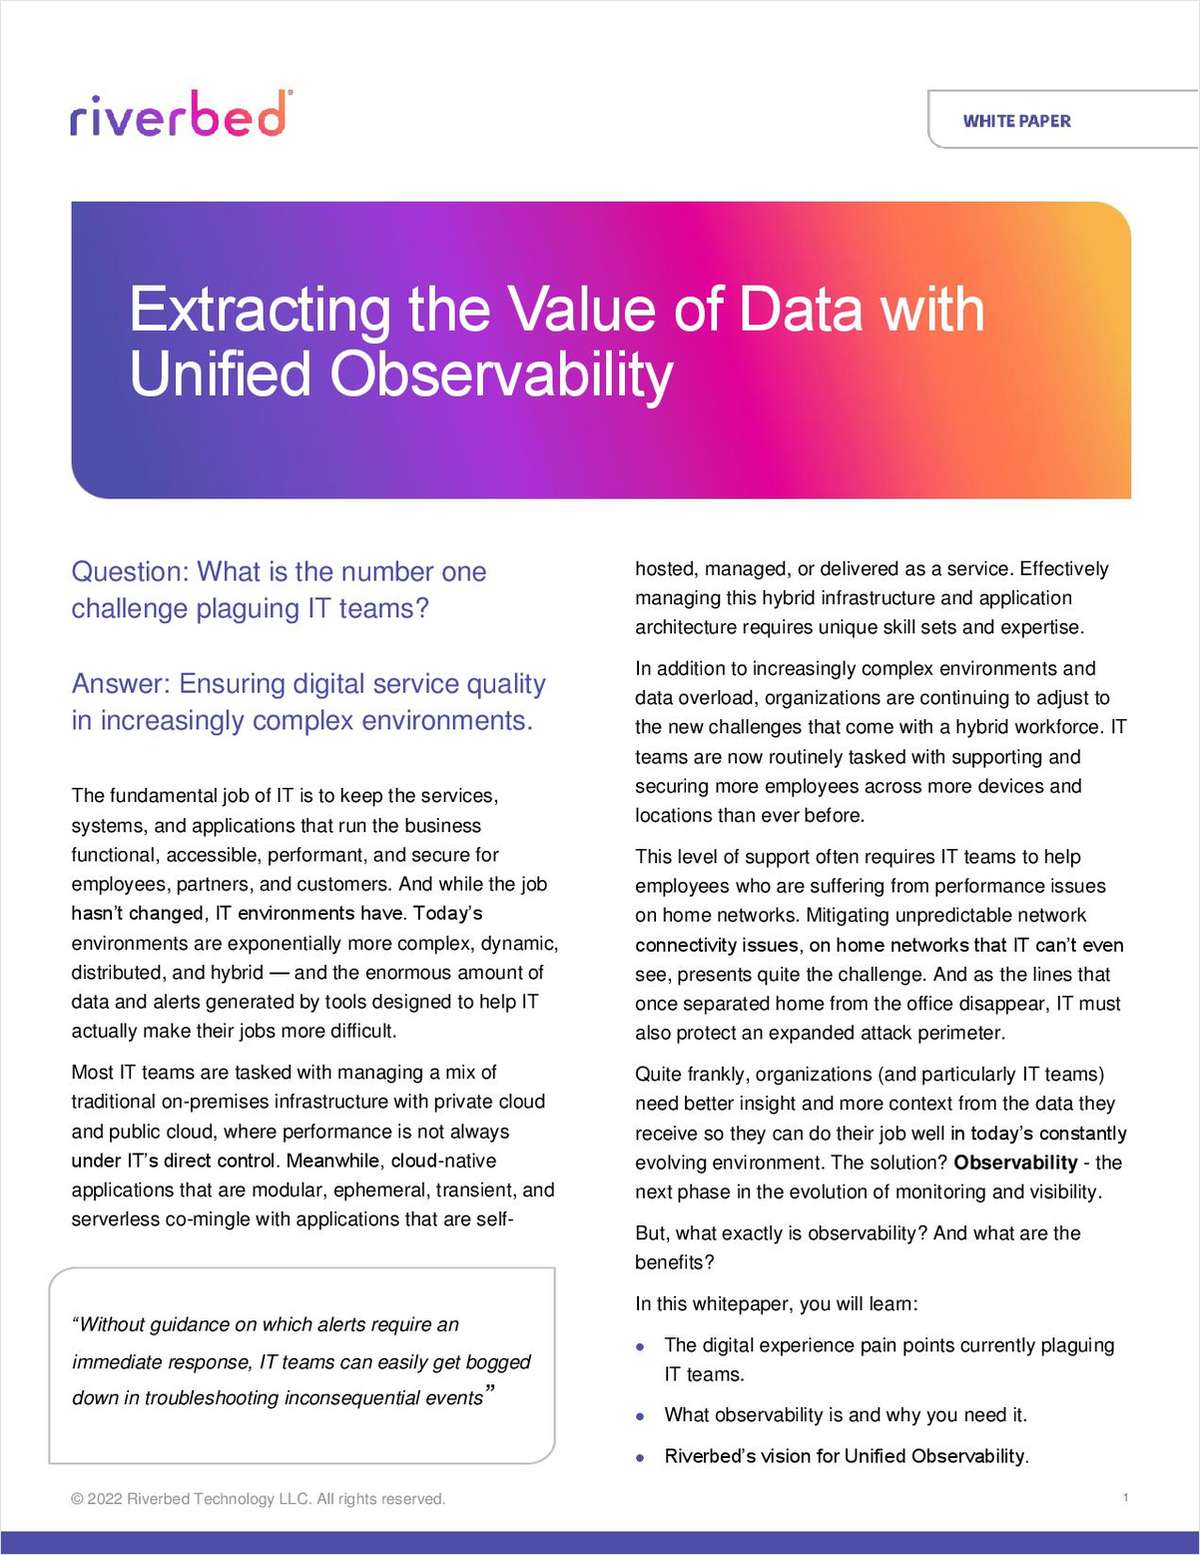 w aaaa16934c8 - Extracting the True Value of Data with Unified Observability